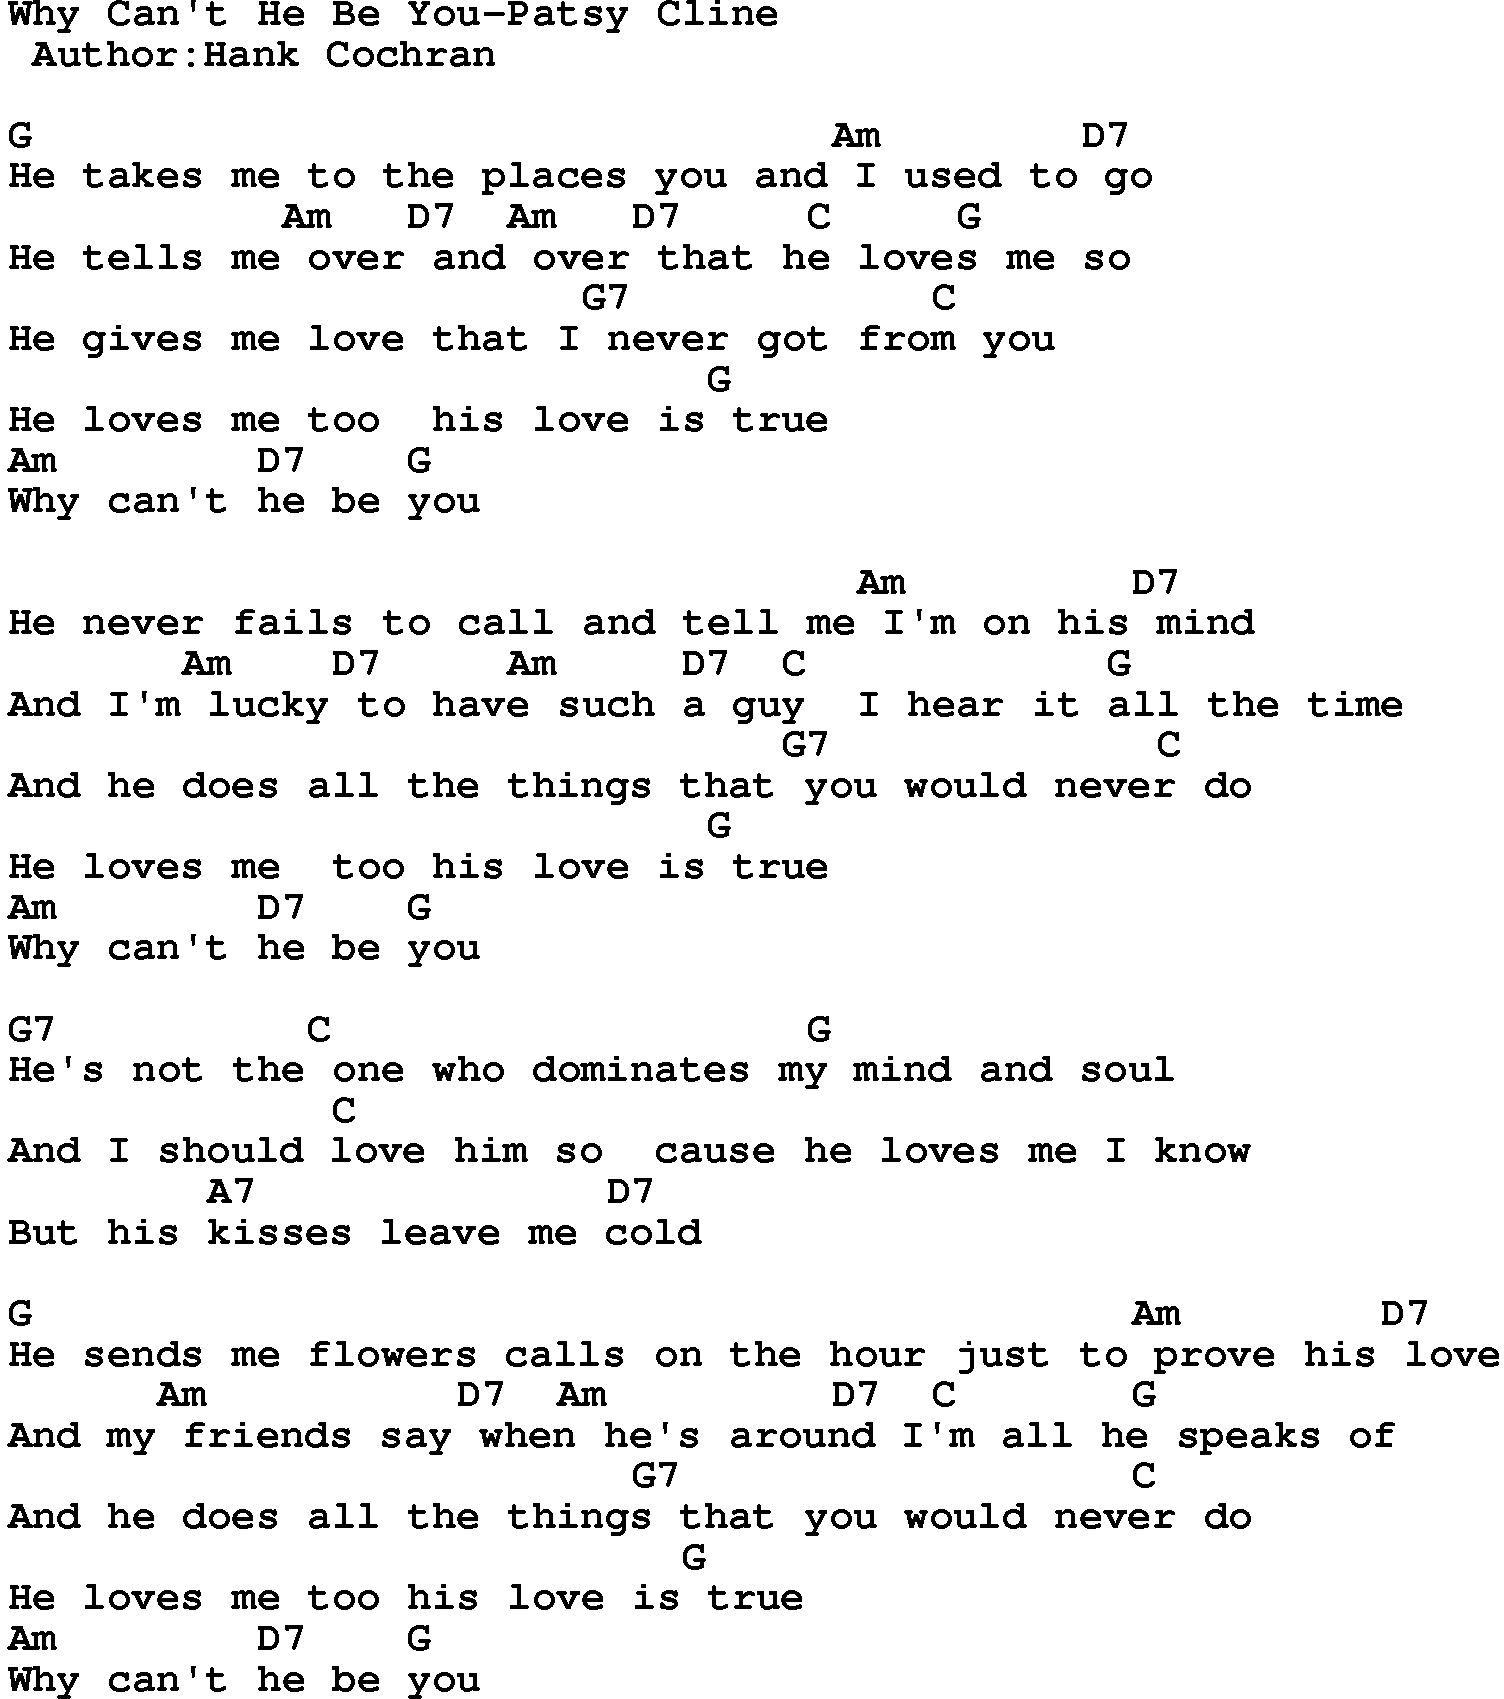 Country music song: Why Can't He Be You-Patsy Cline lyrics and chords